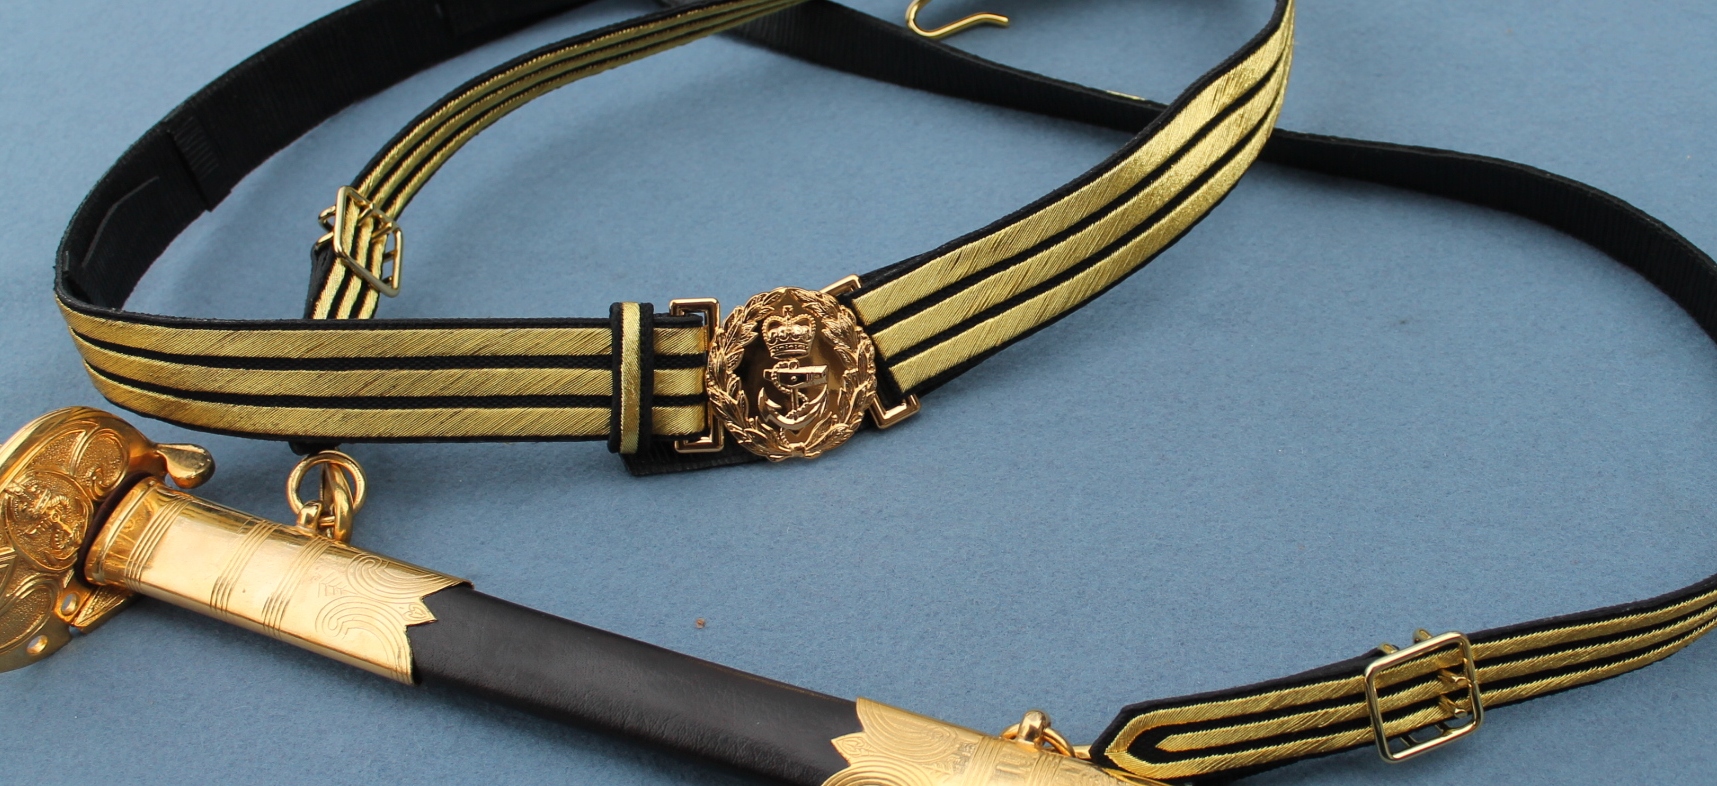 Leather Sword Belts and Military Accoutrements